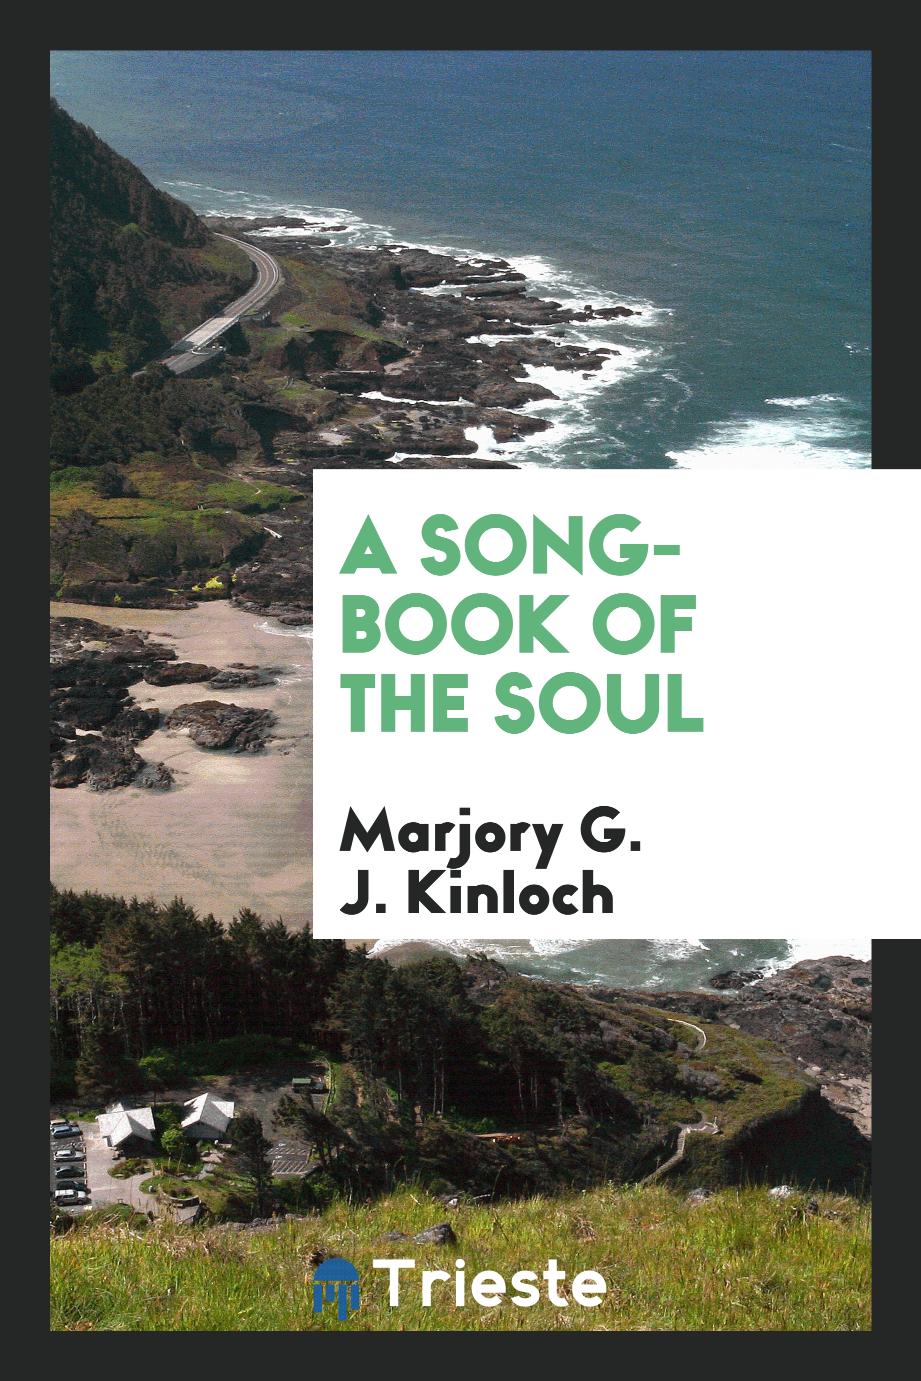 A song-book of the soul